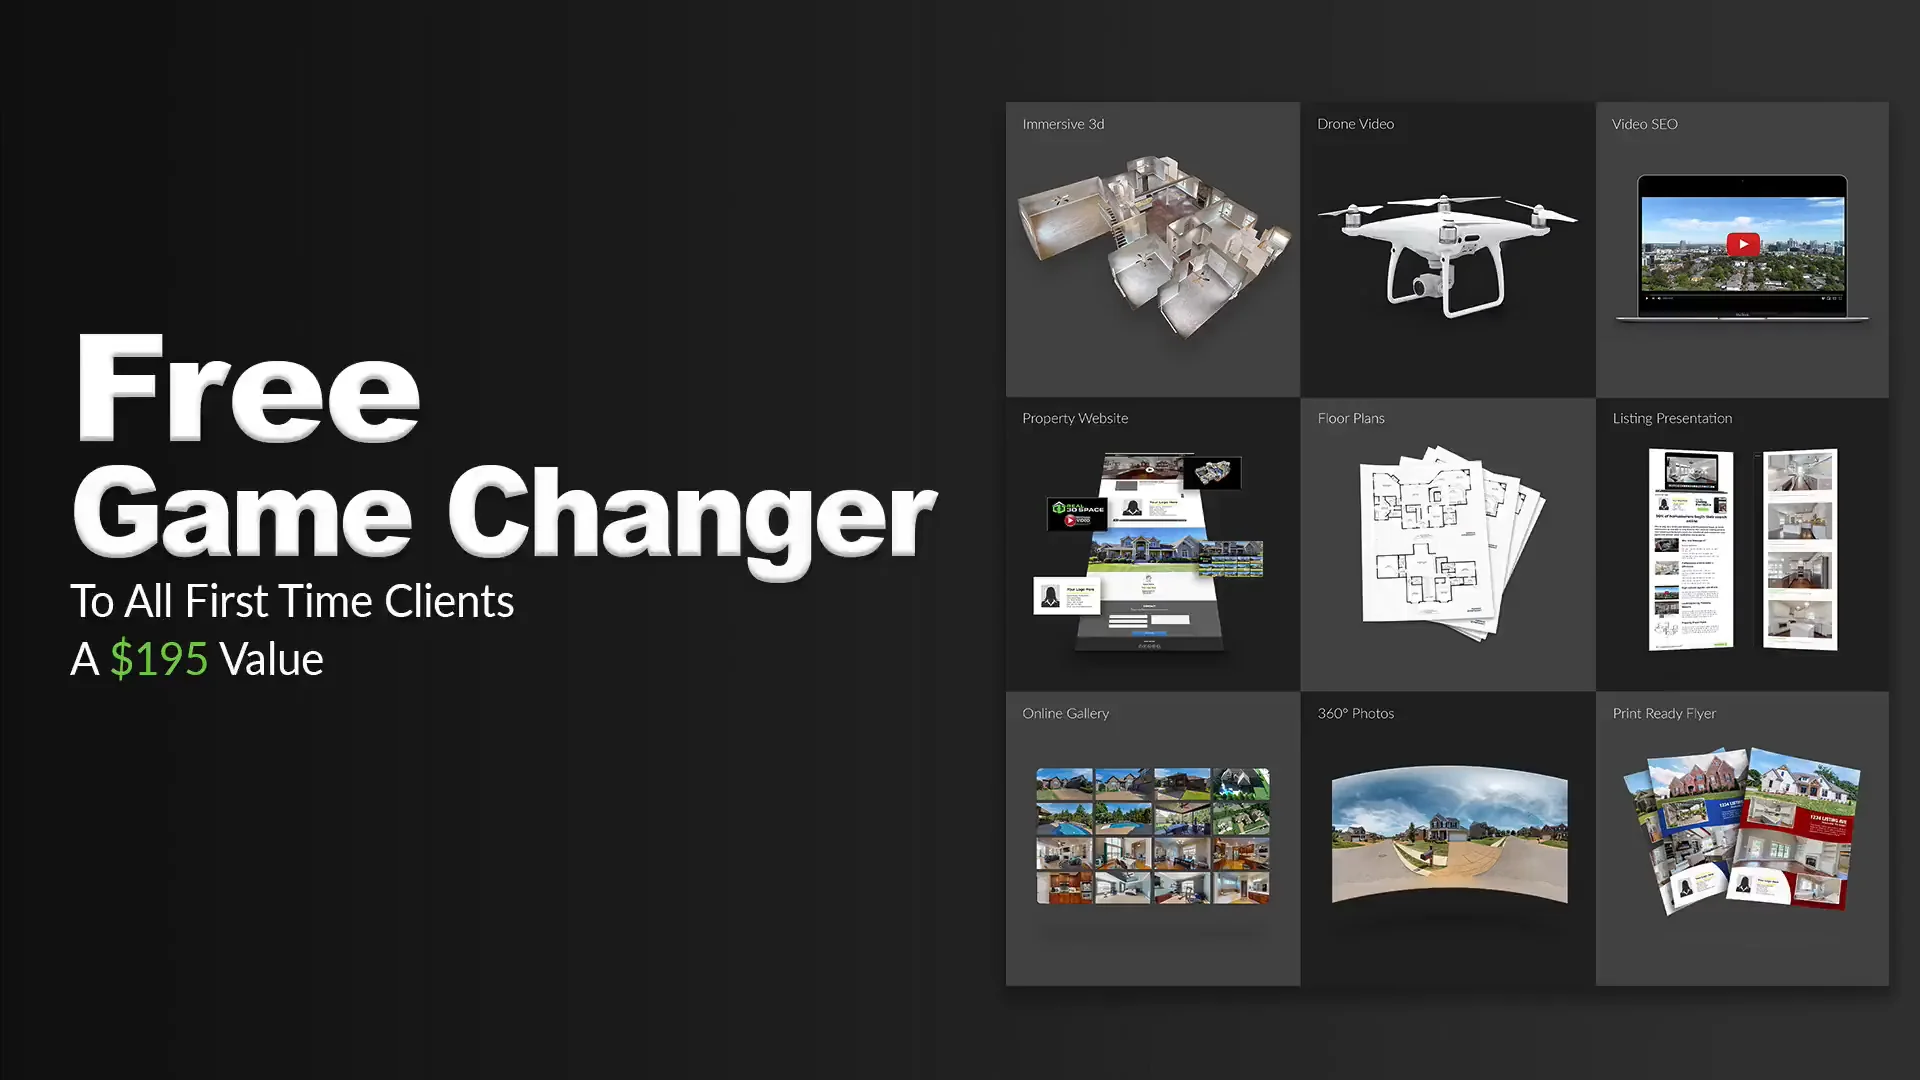 Free Game Changer Video_unbranded on Vimeo